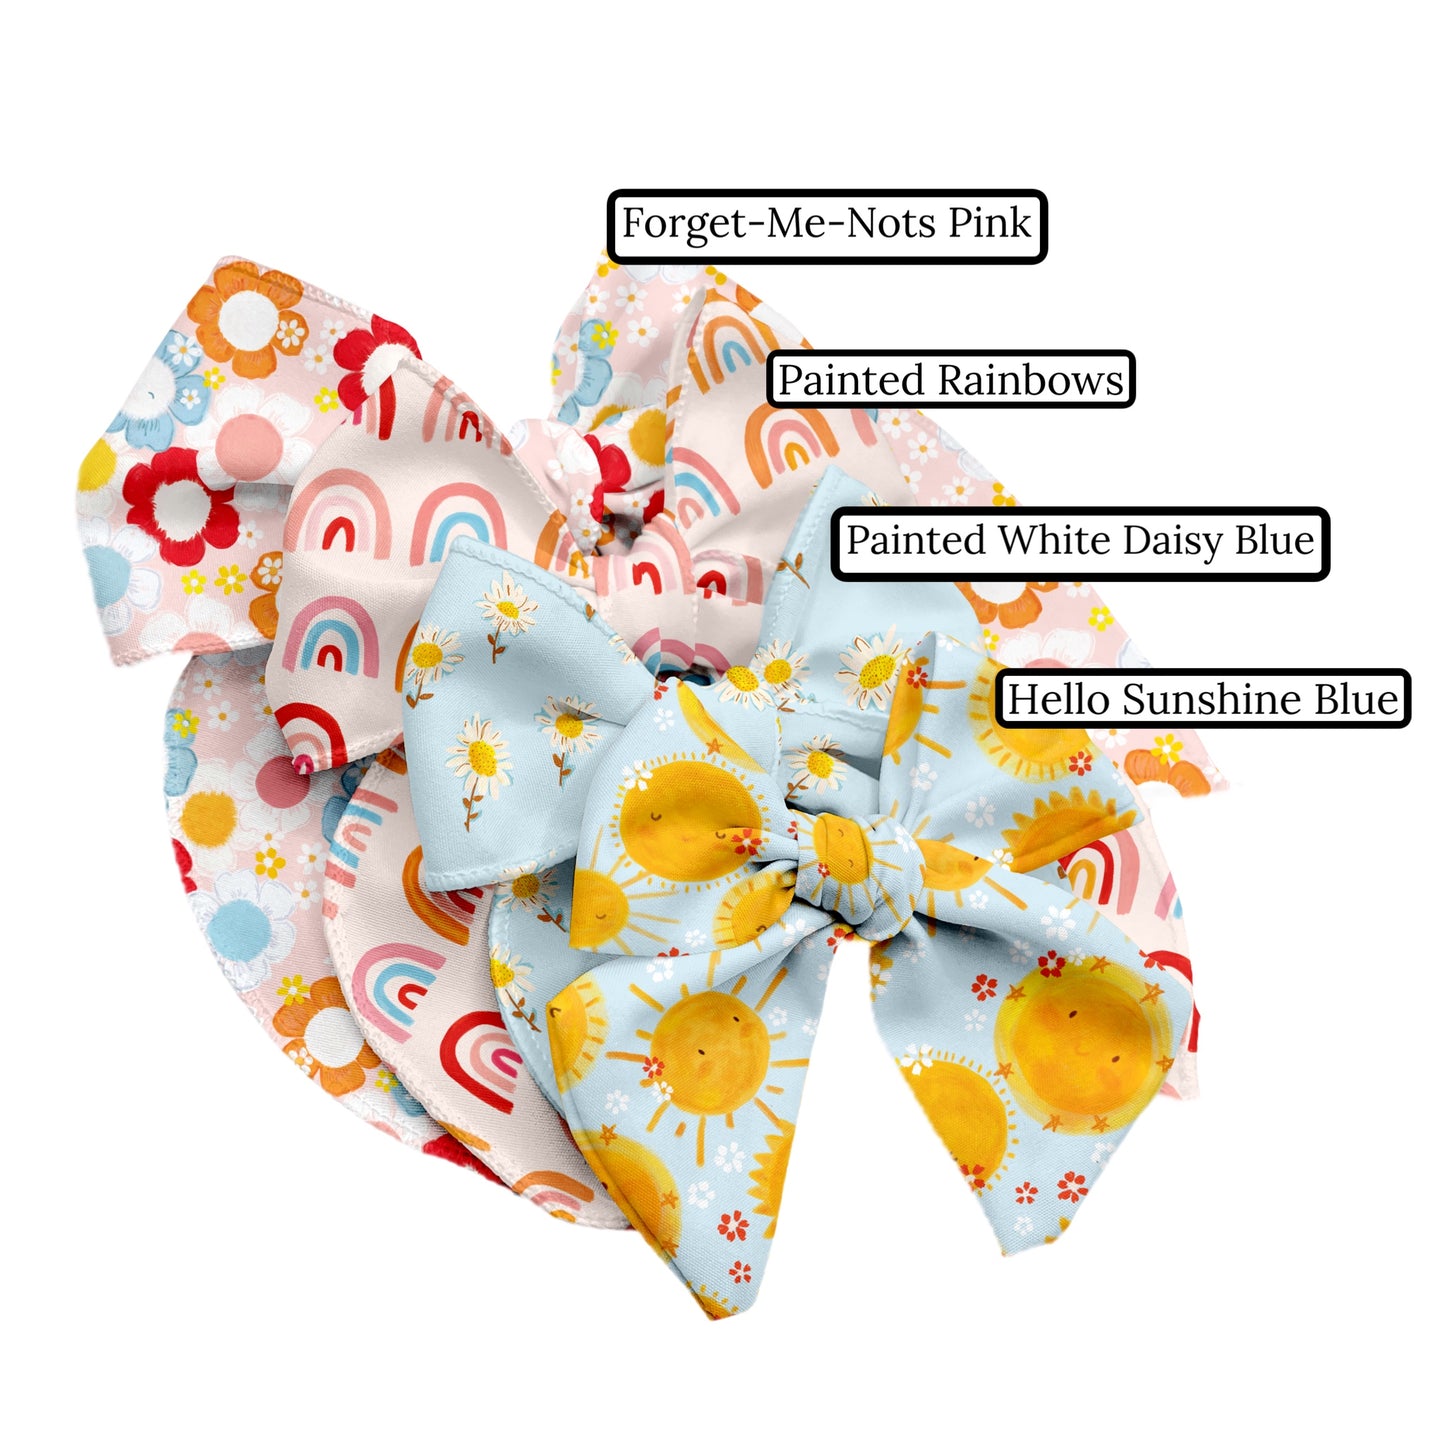 Forget-Me-Nots Pink Hair Bow Strips